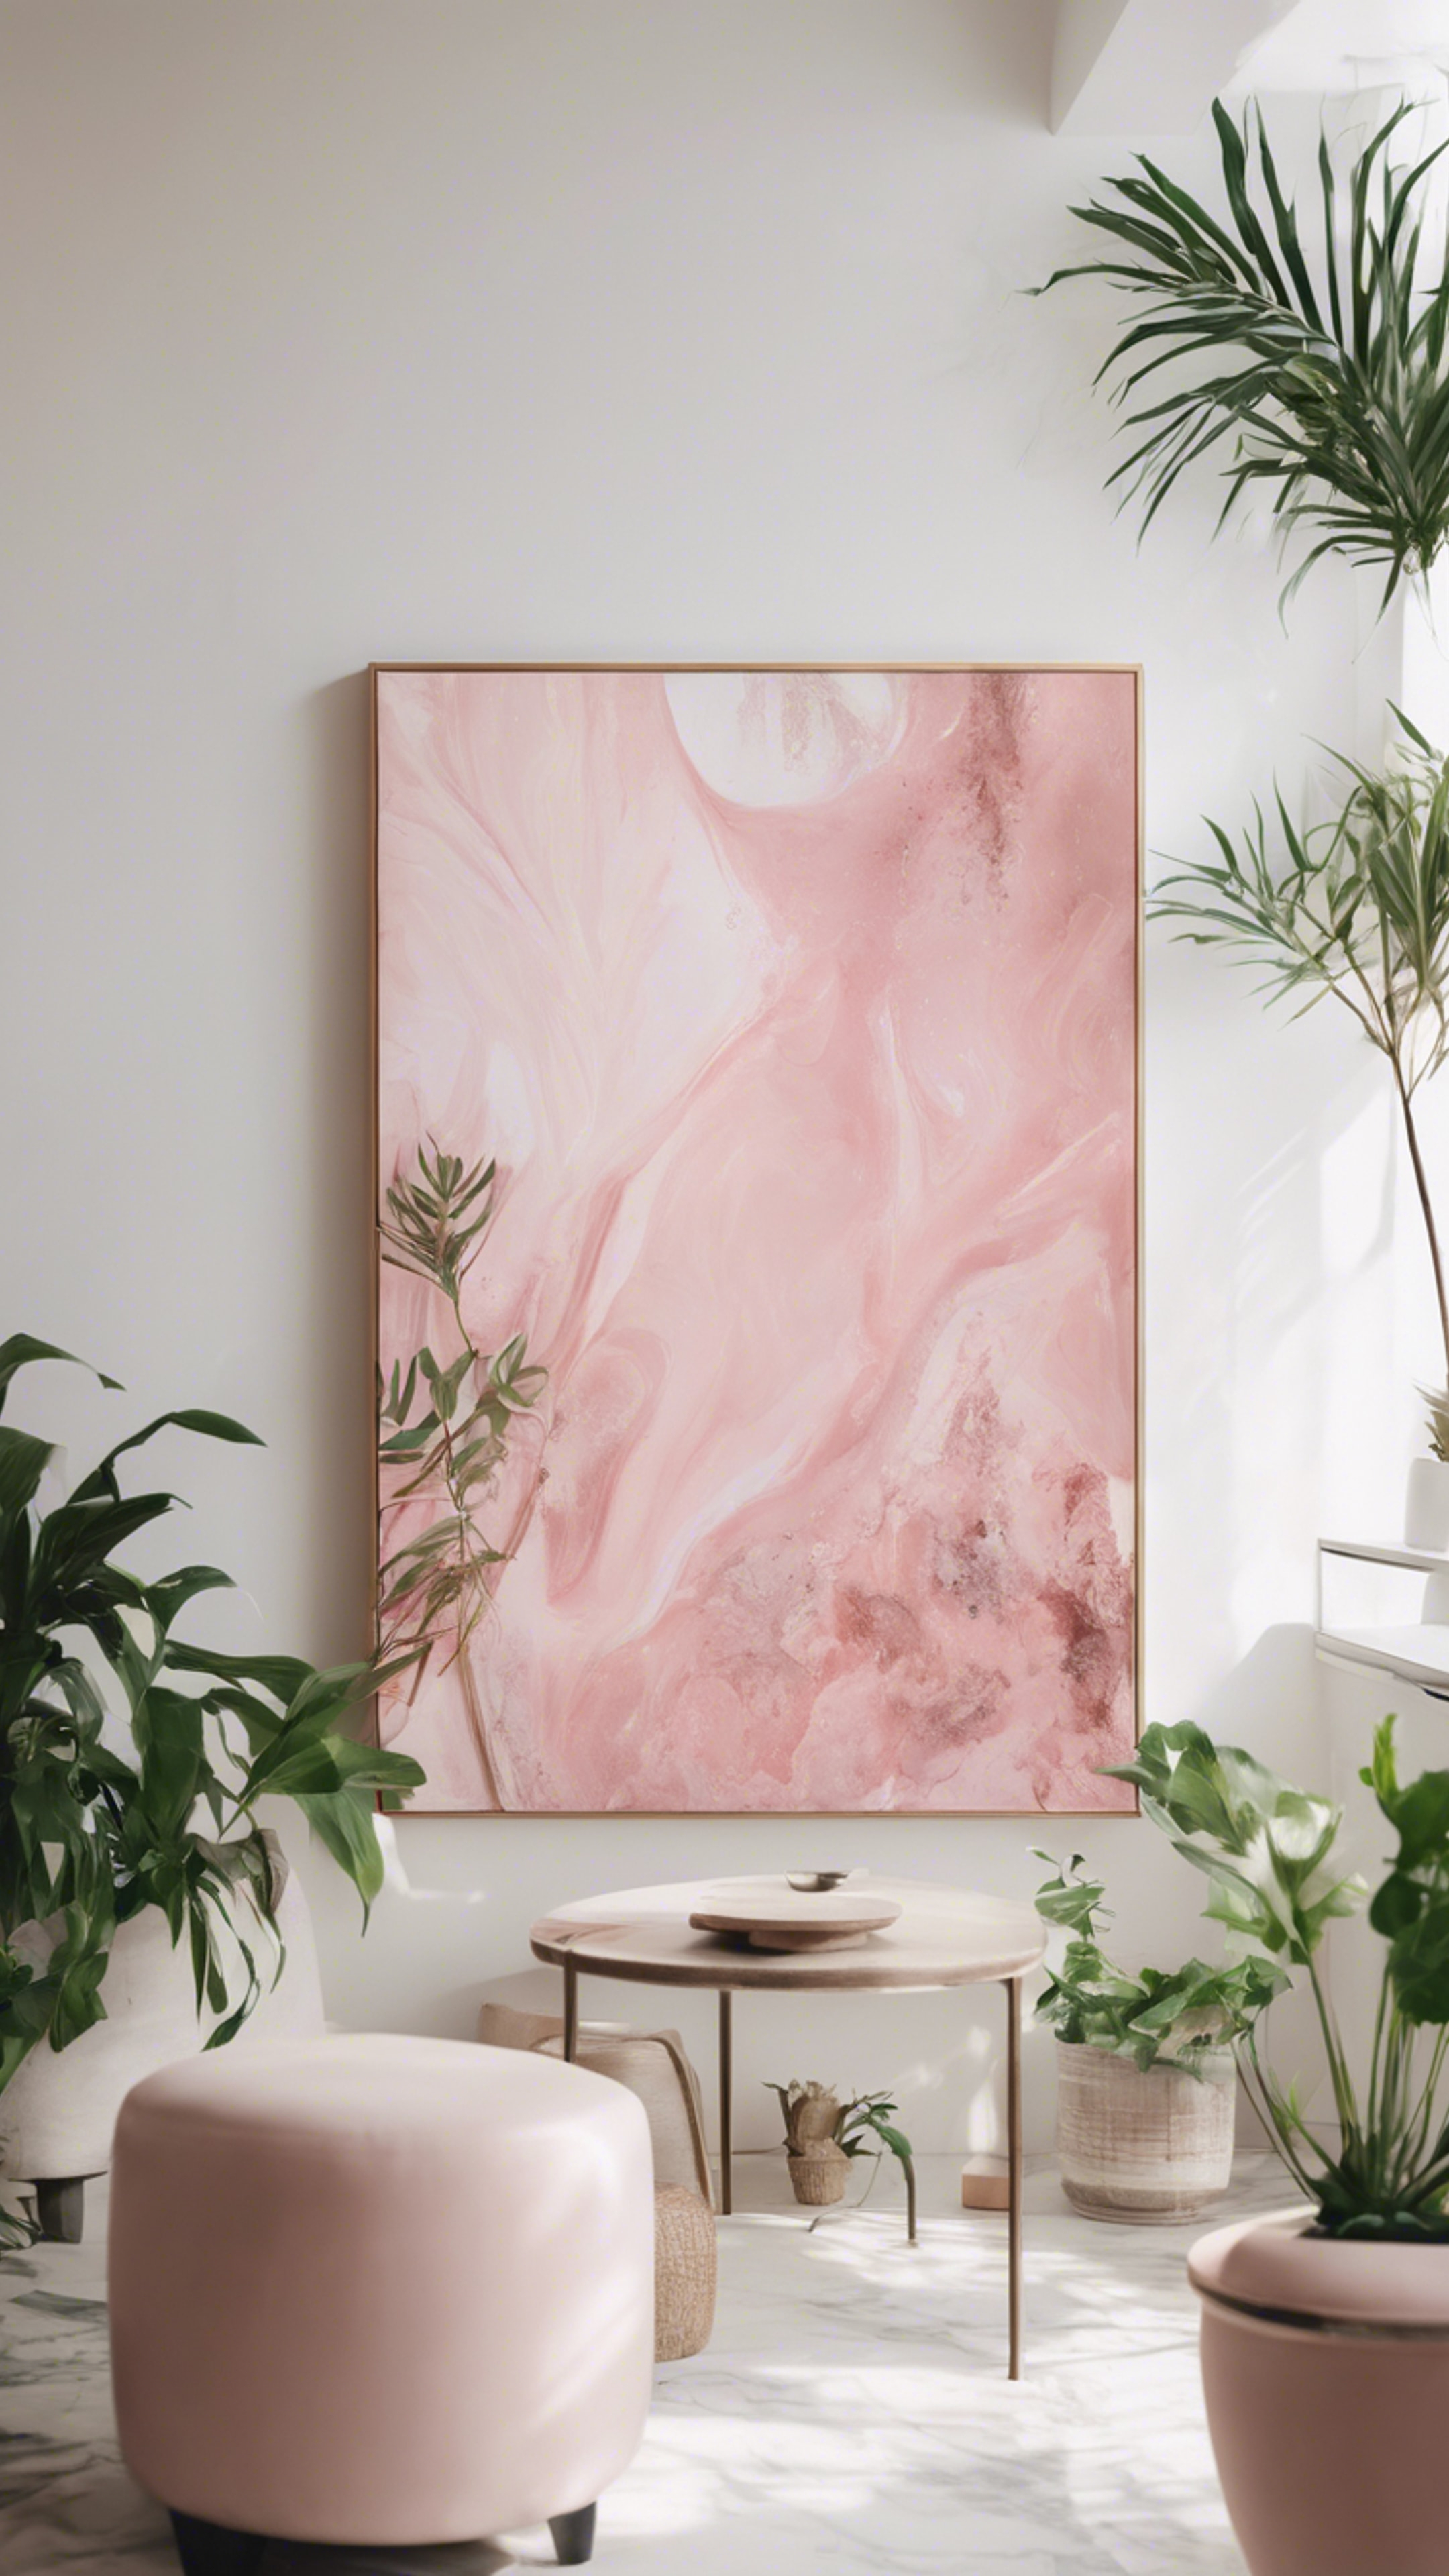 A soft pink abstract painting on a white wall surrounded by indoor plants, enhancing the aesthetic of the room Tapeta[9fa4f1f3650f4fbb9955]